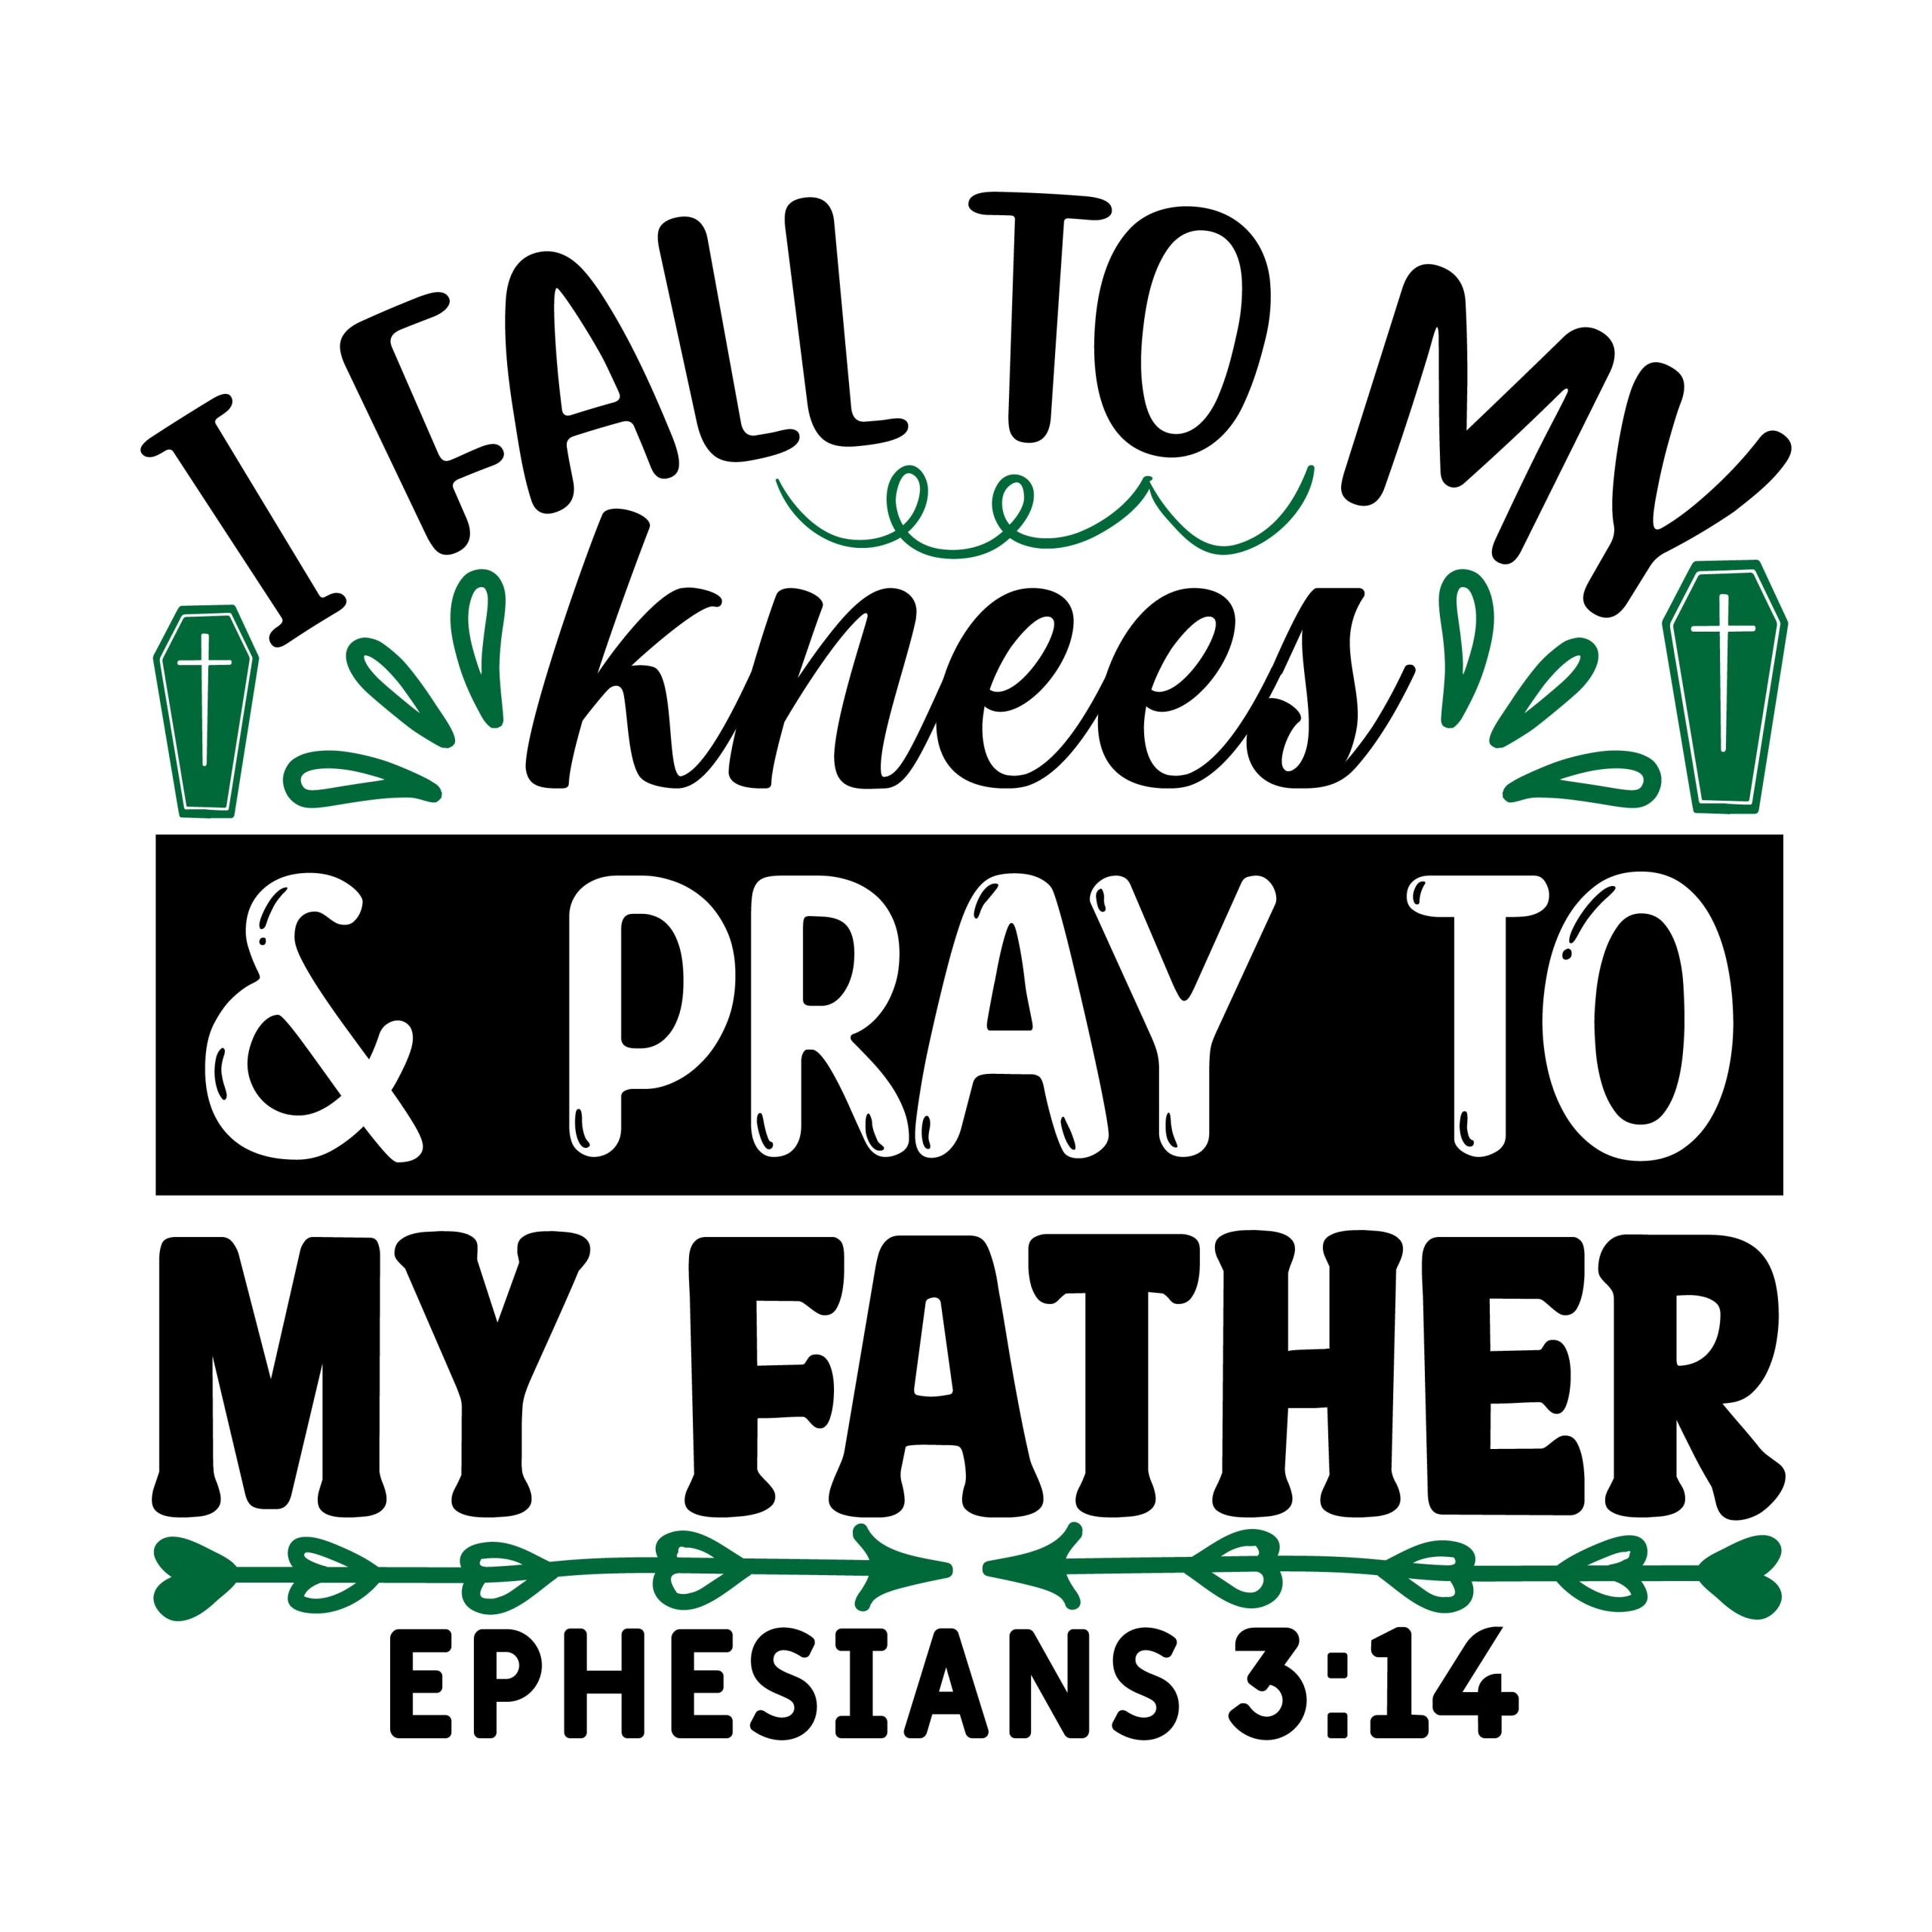 I fall to my knees and pray to my father Ephesians 3:14, bible verses, scripture verses, svg files, passages, sayings, cricut designs, silhouette, embroidery, bundle, free cut files, design space, vector